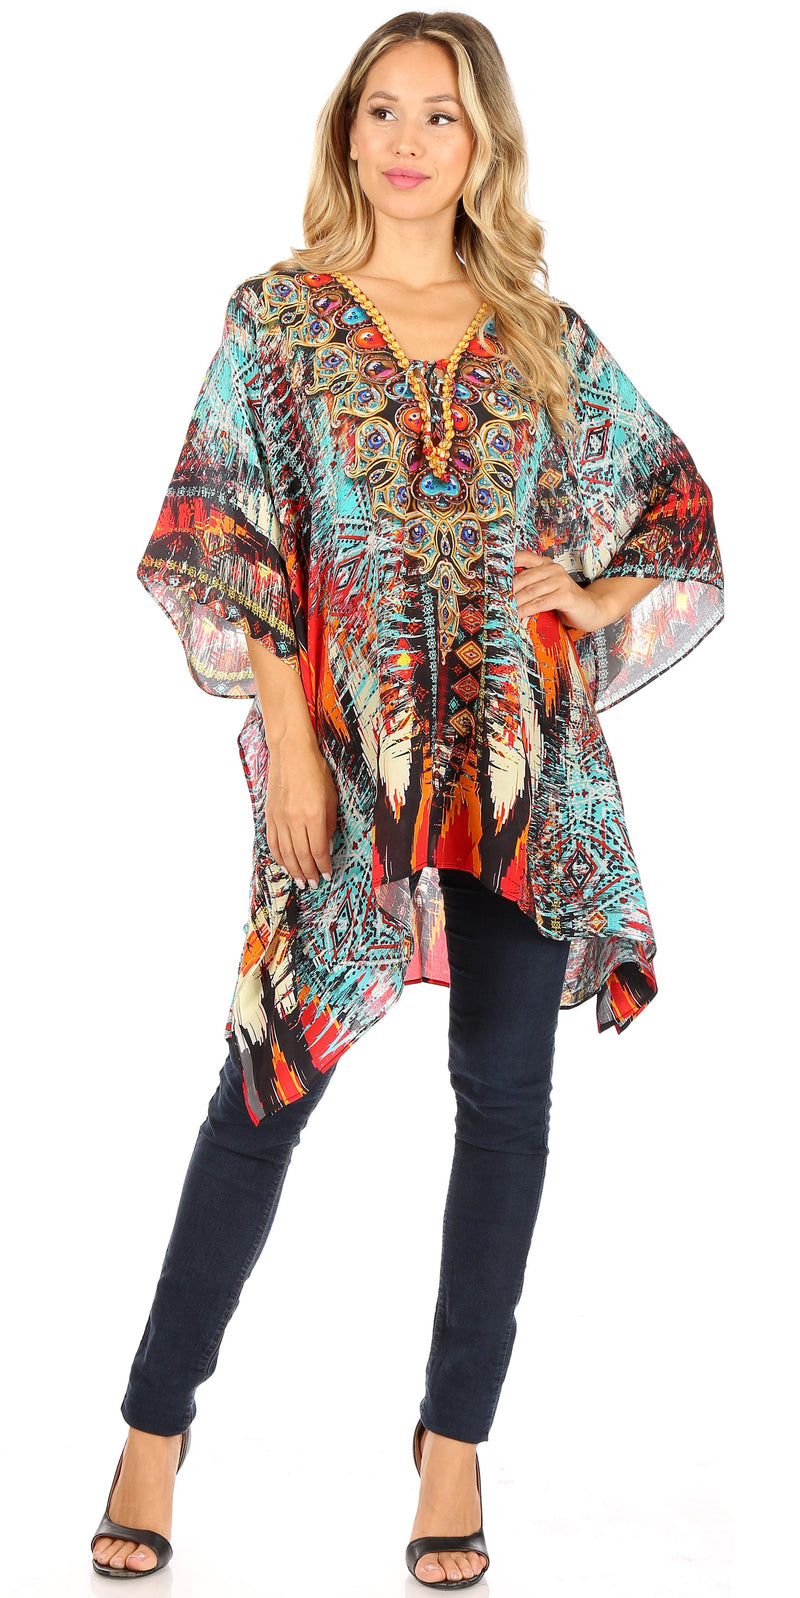 Sakkas Aymee Women's Caftan Poncho Cover up V neck Top Lace up With Rhinestone